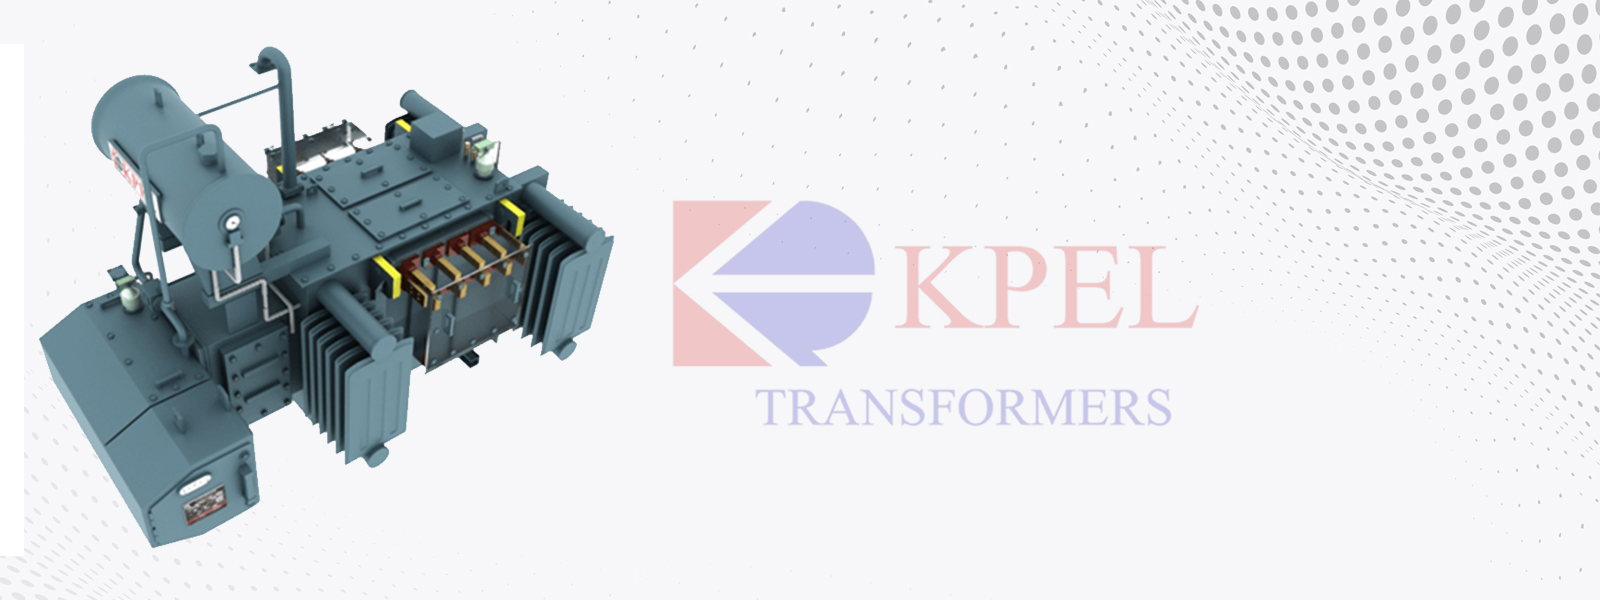 Three Phase Transformer Manufacturers in India